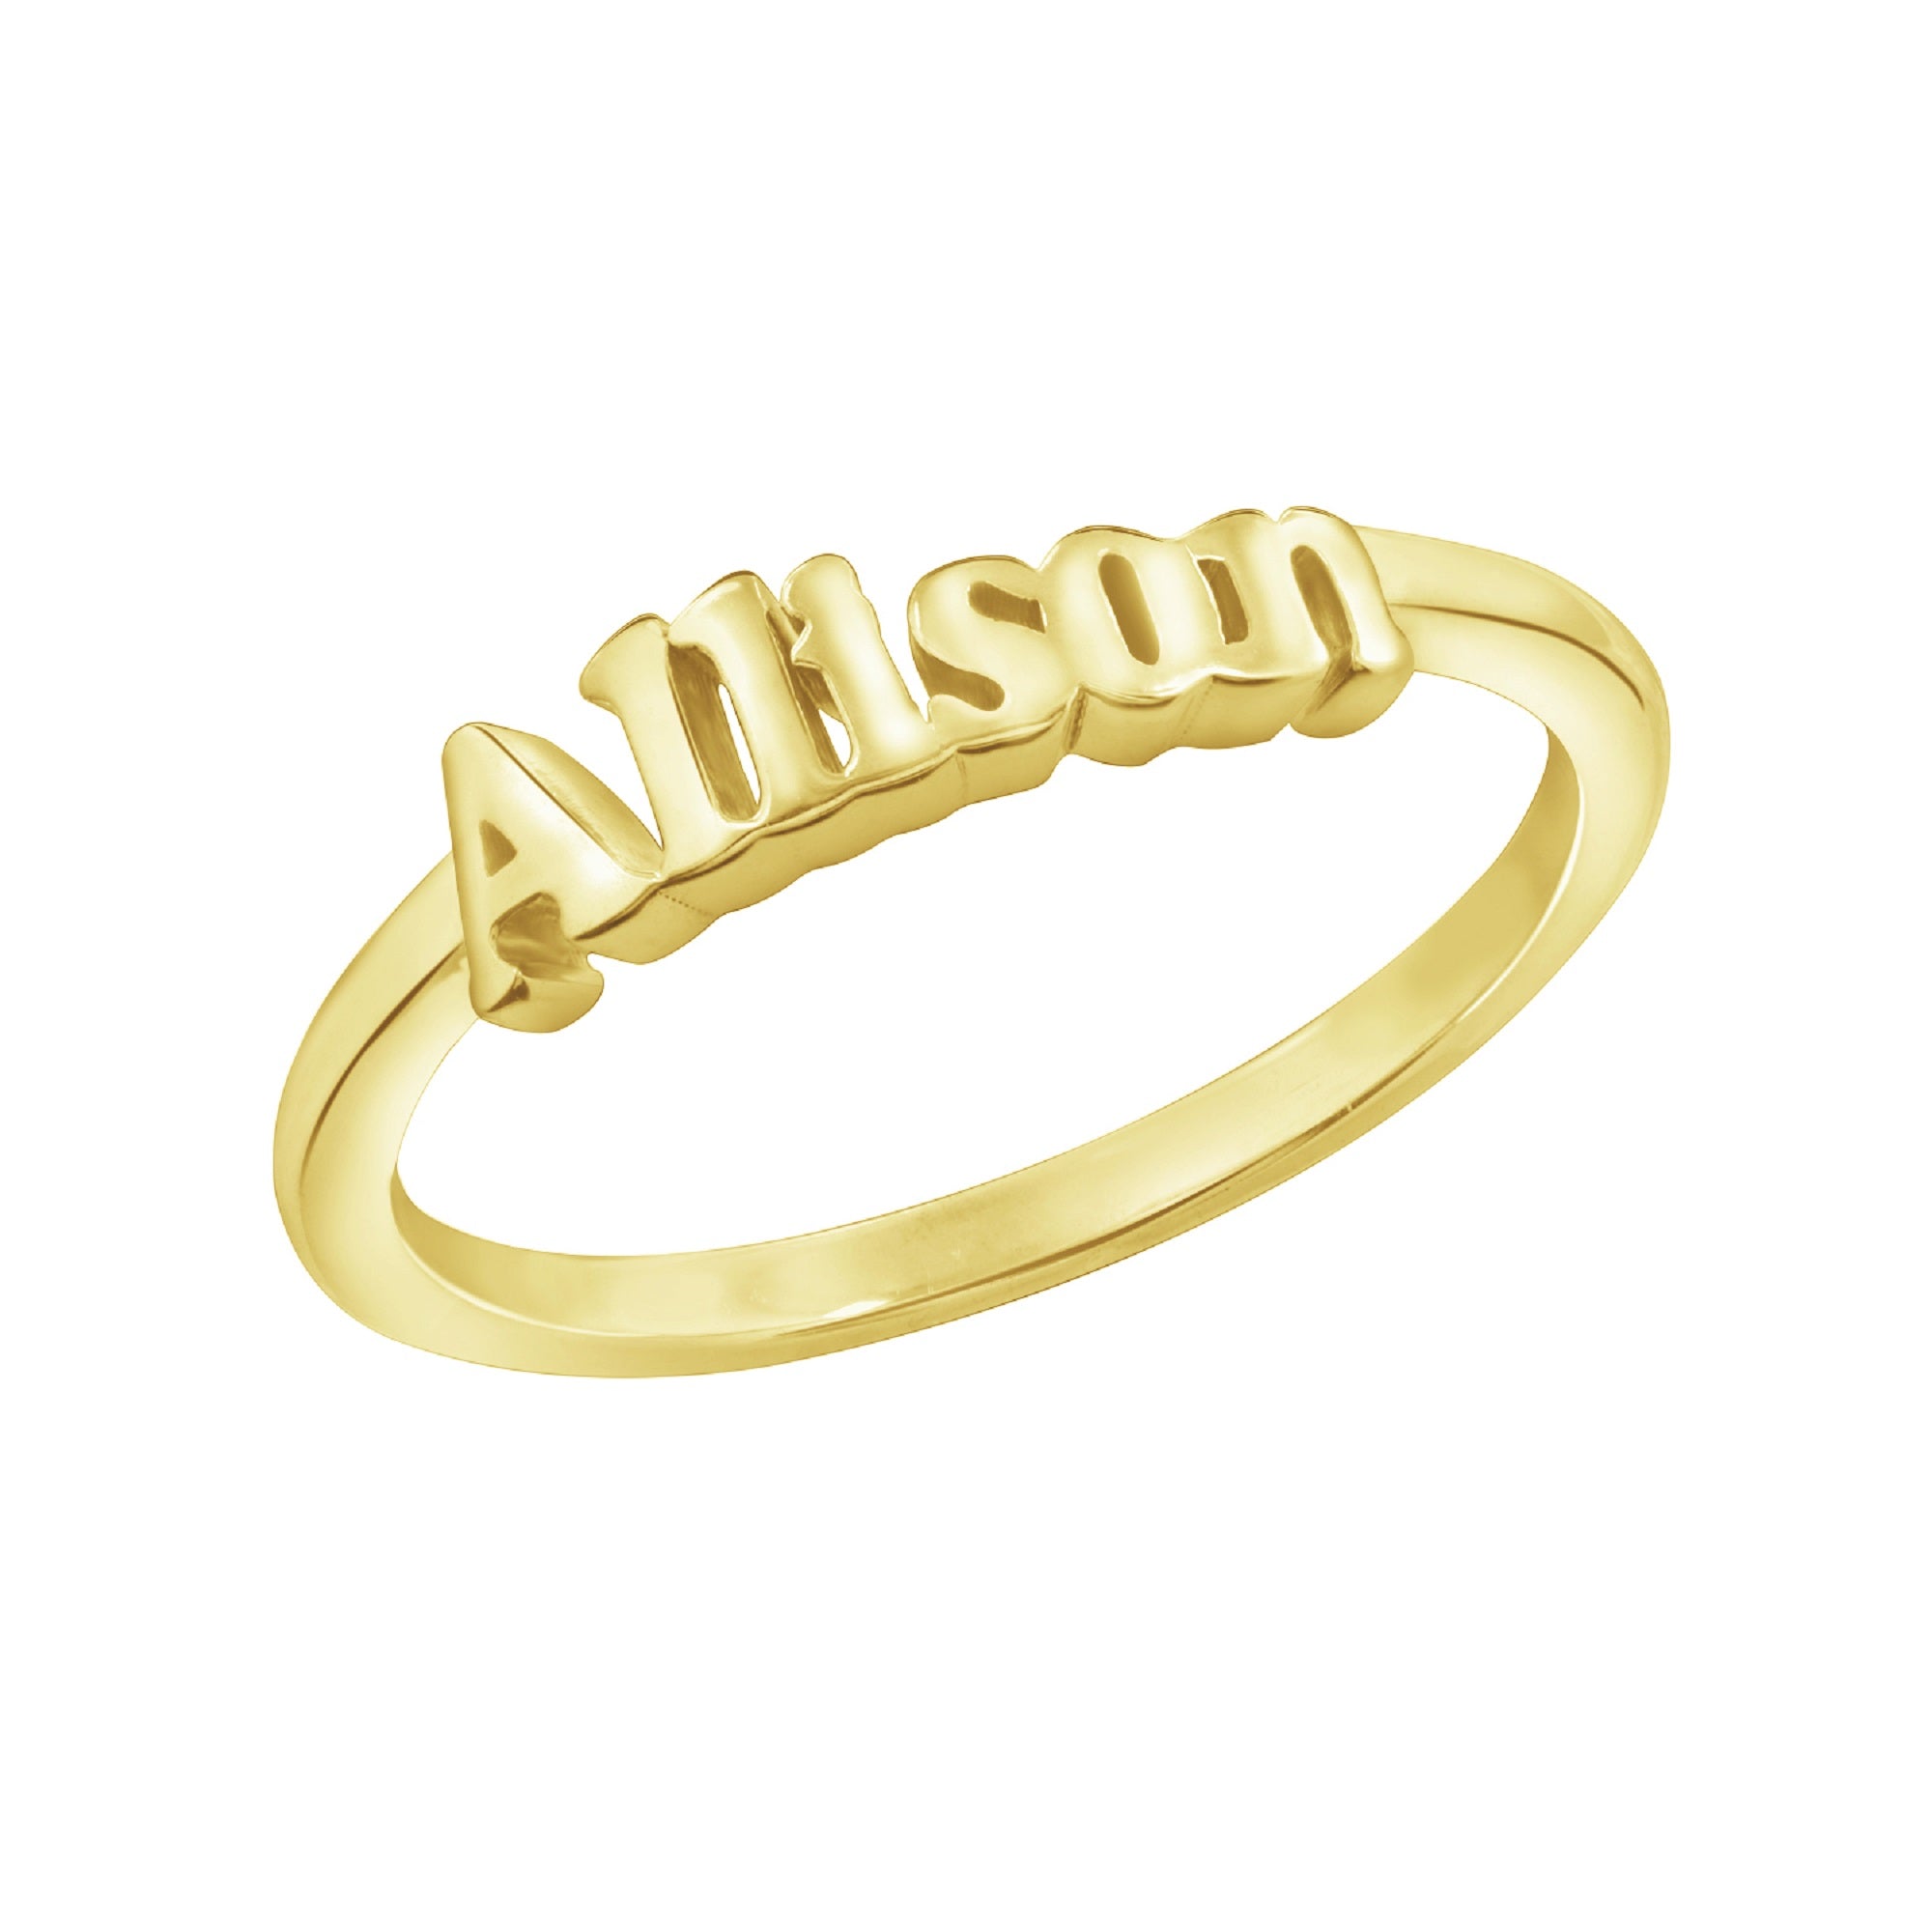 Personalized Name Ring – Jadmire Jewelry